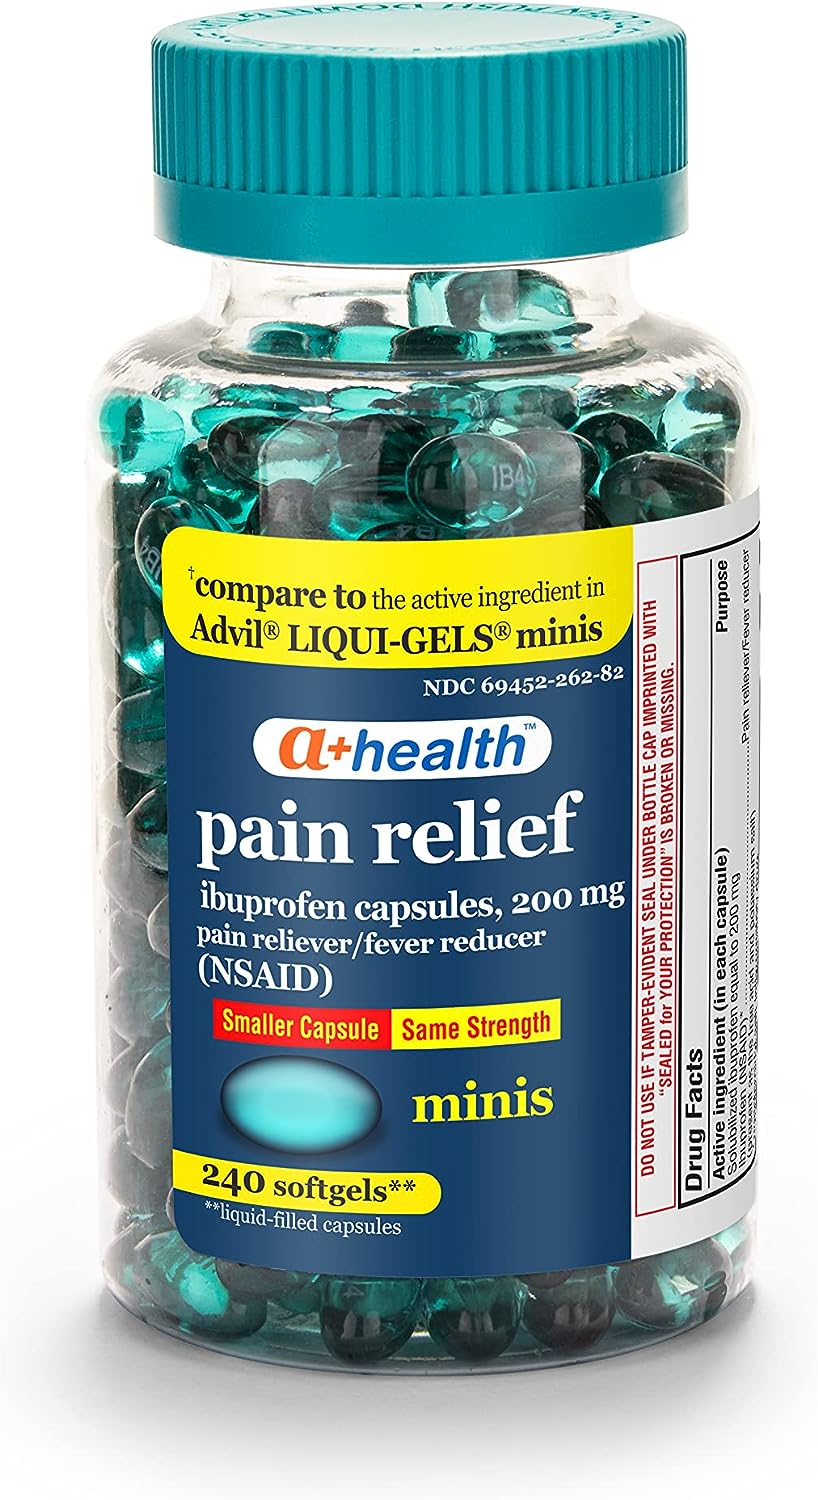 Mini Ibuprofen 200 Mg Softgels, Pain Reliever/Fever Reducer (NSAID), Made in USA, 240 Count